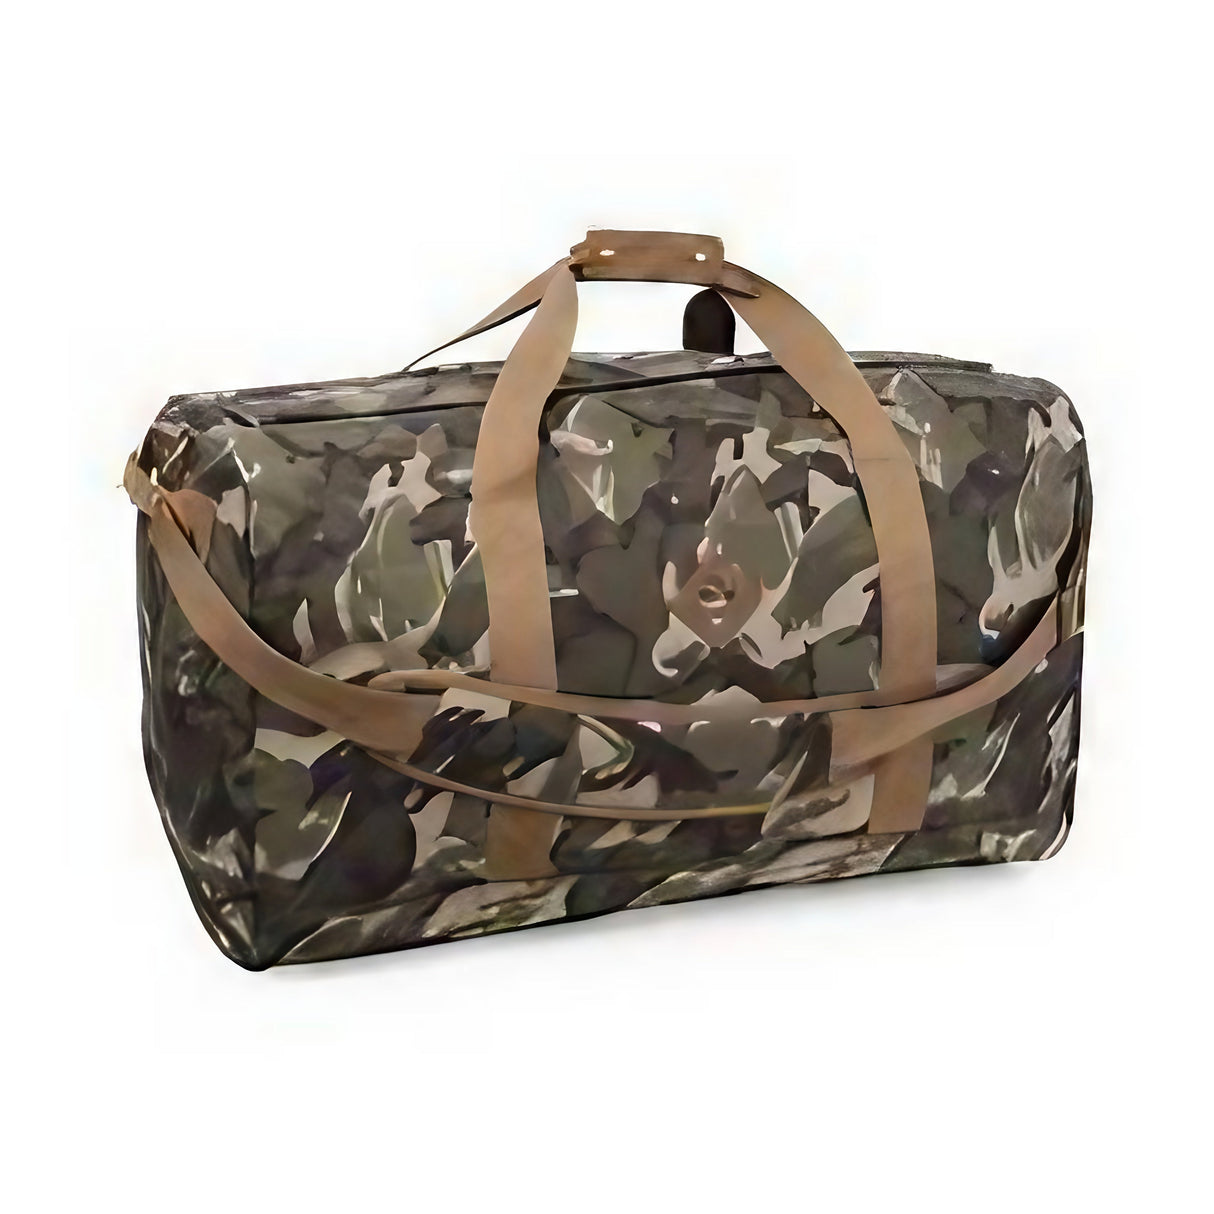 Revelry Supply Continental medium-sized rubber duffel bag in camo print, front view on white background